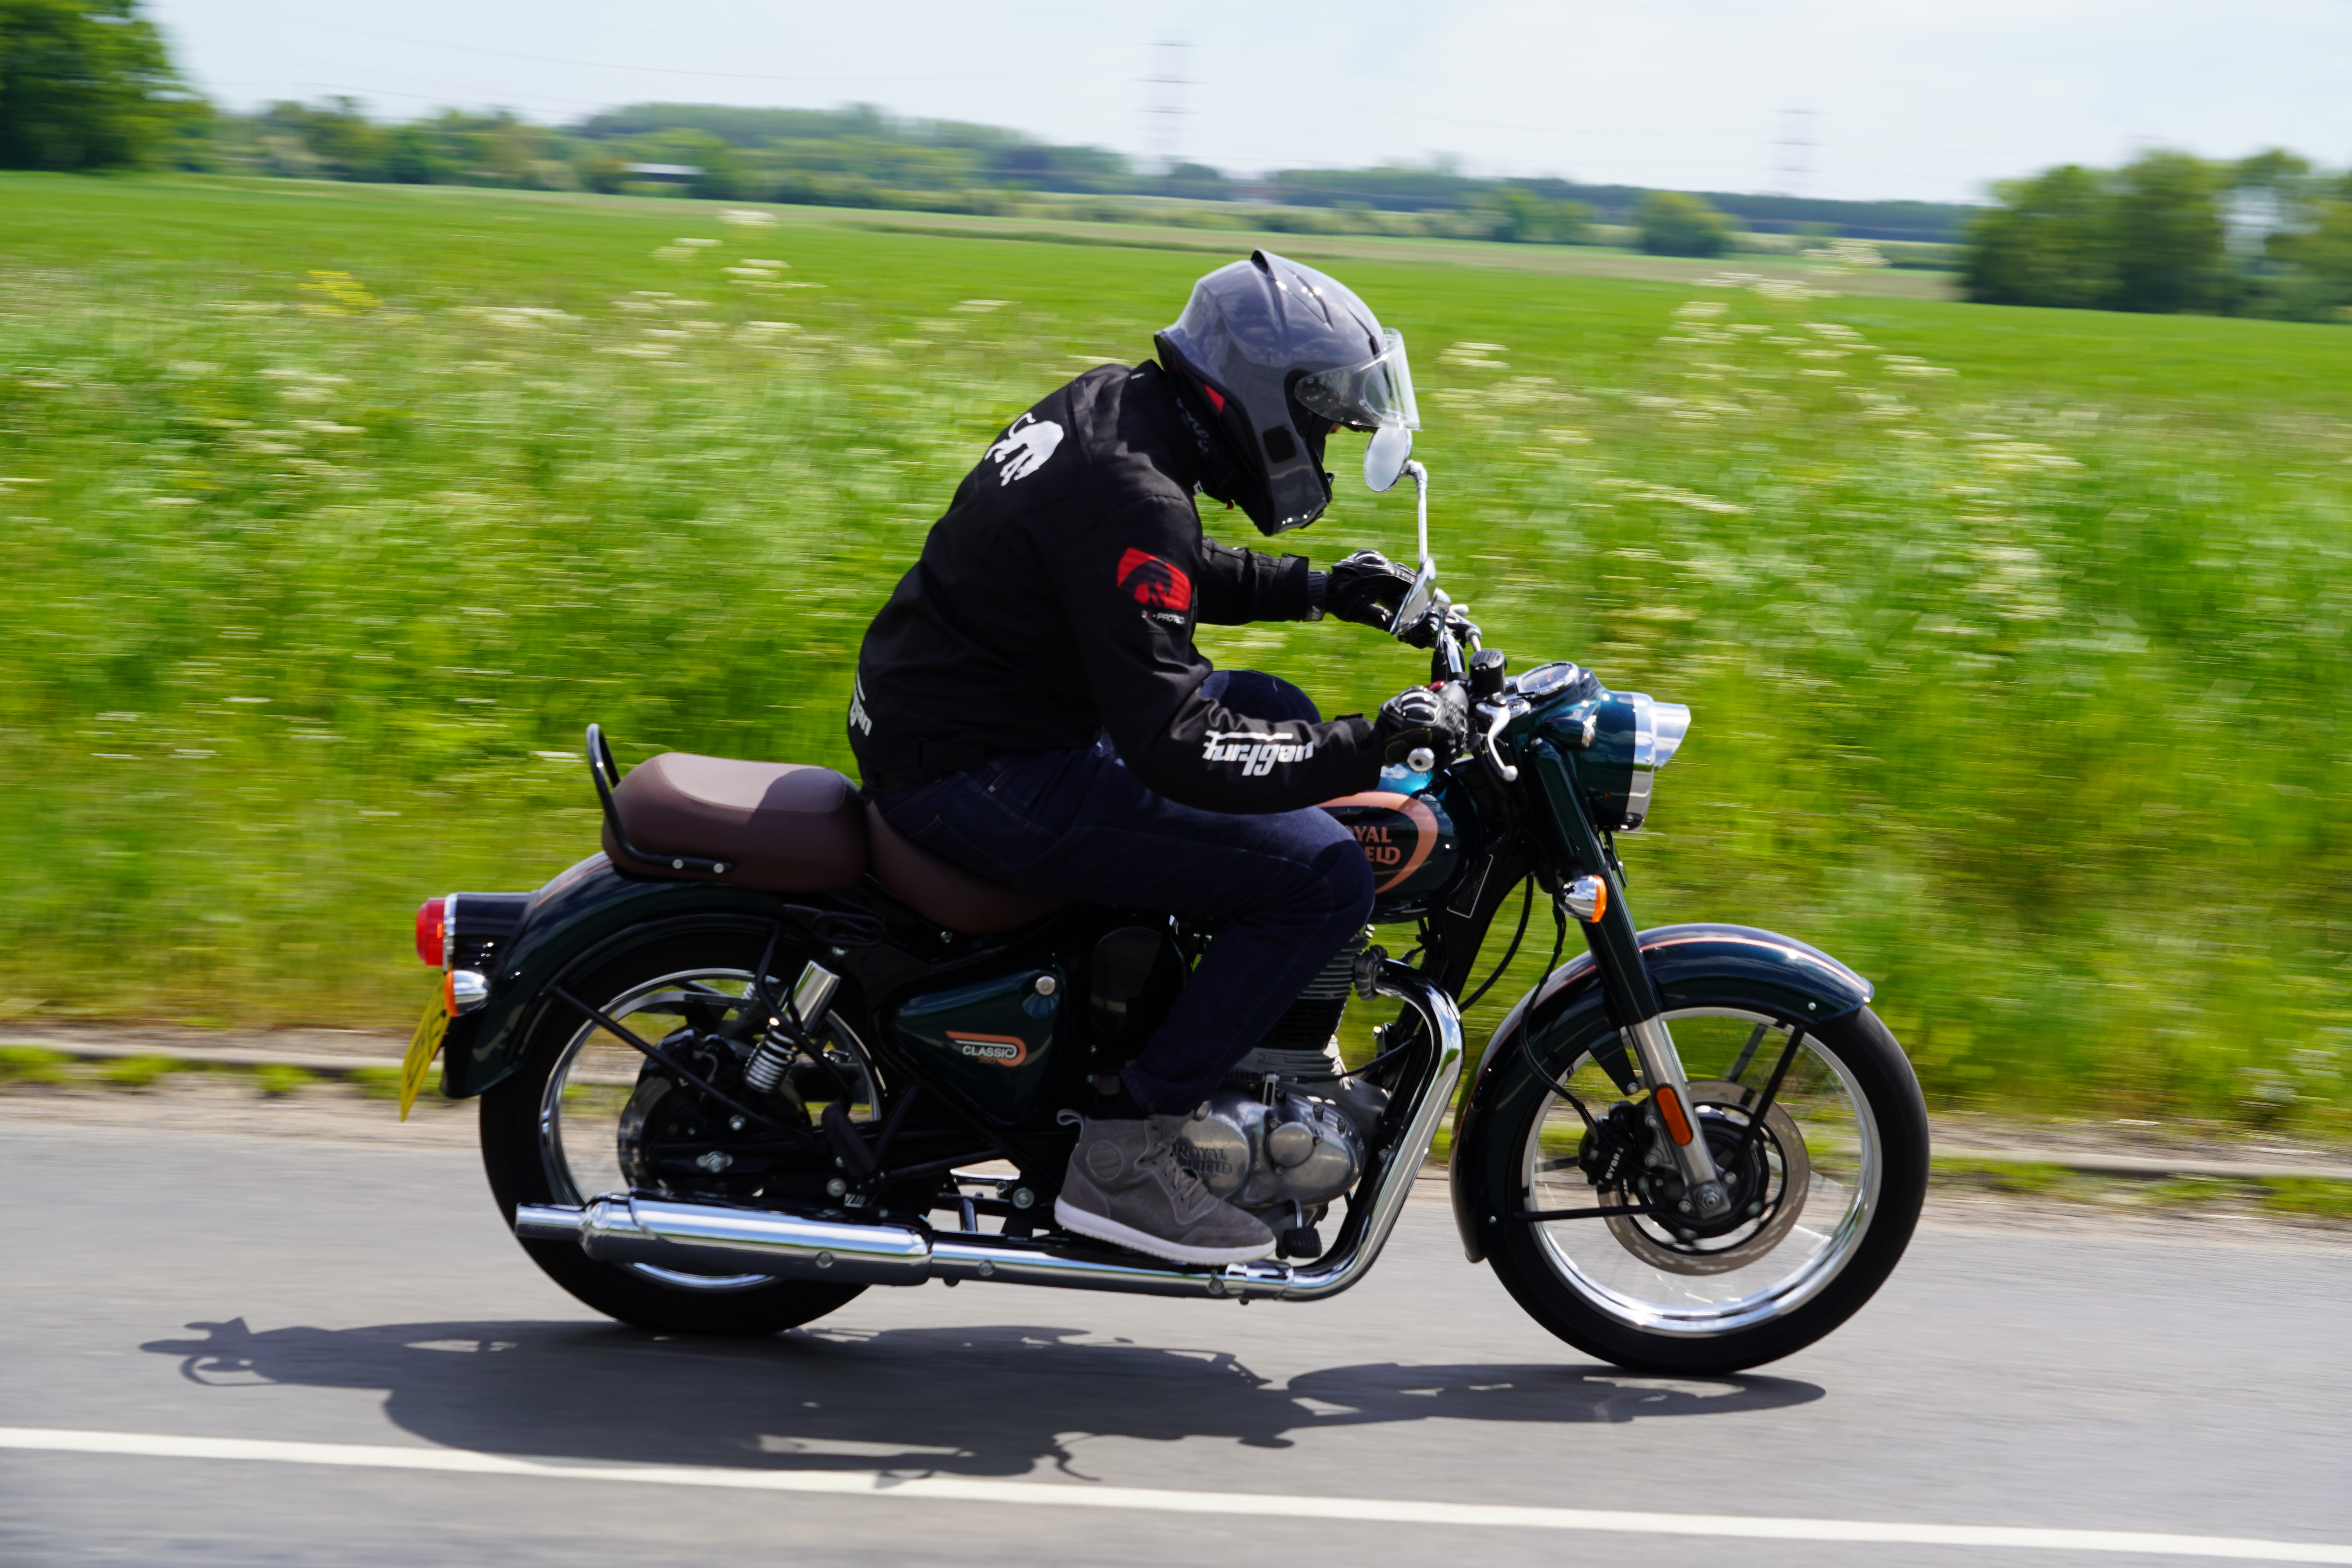 Riding the Royal Enfield Classic 350